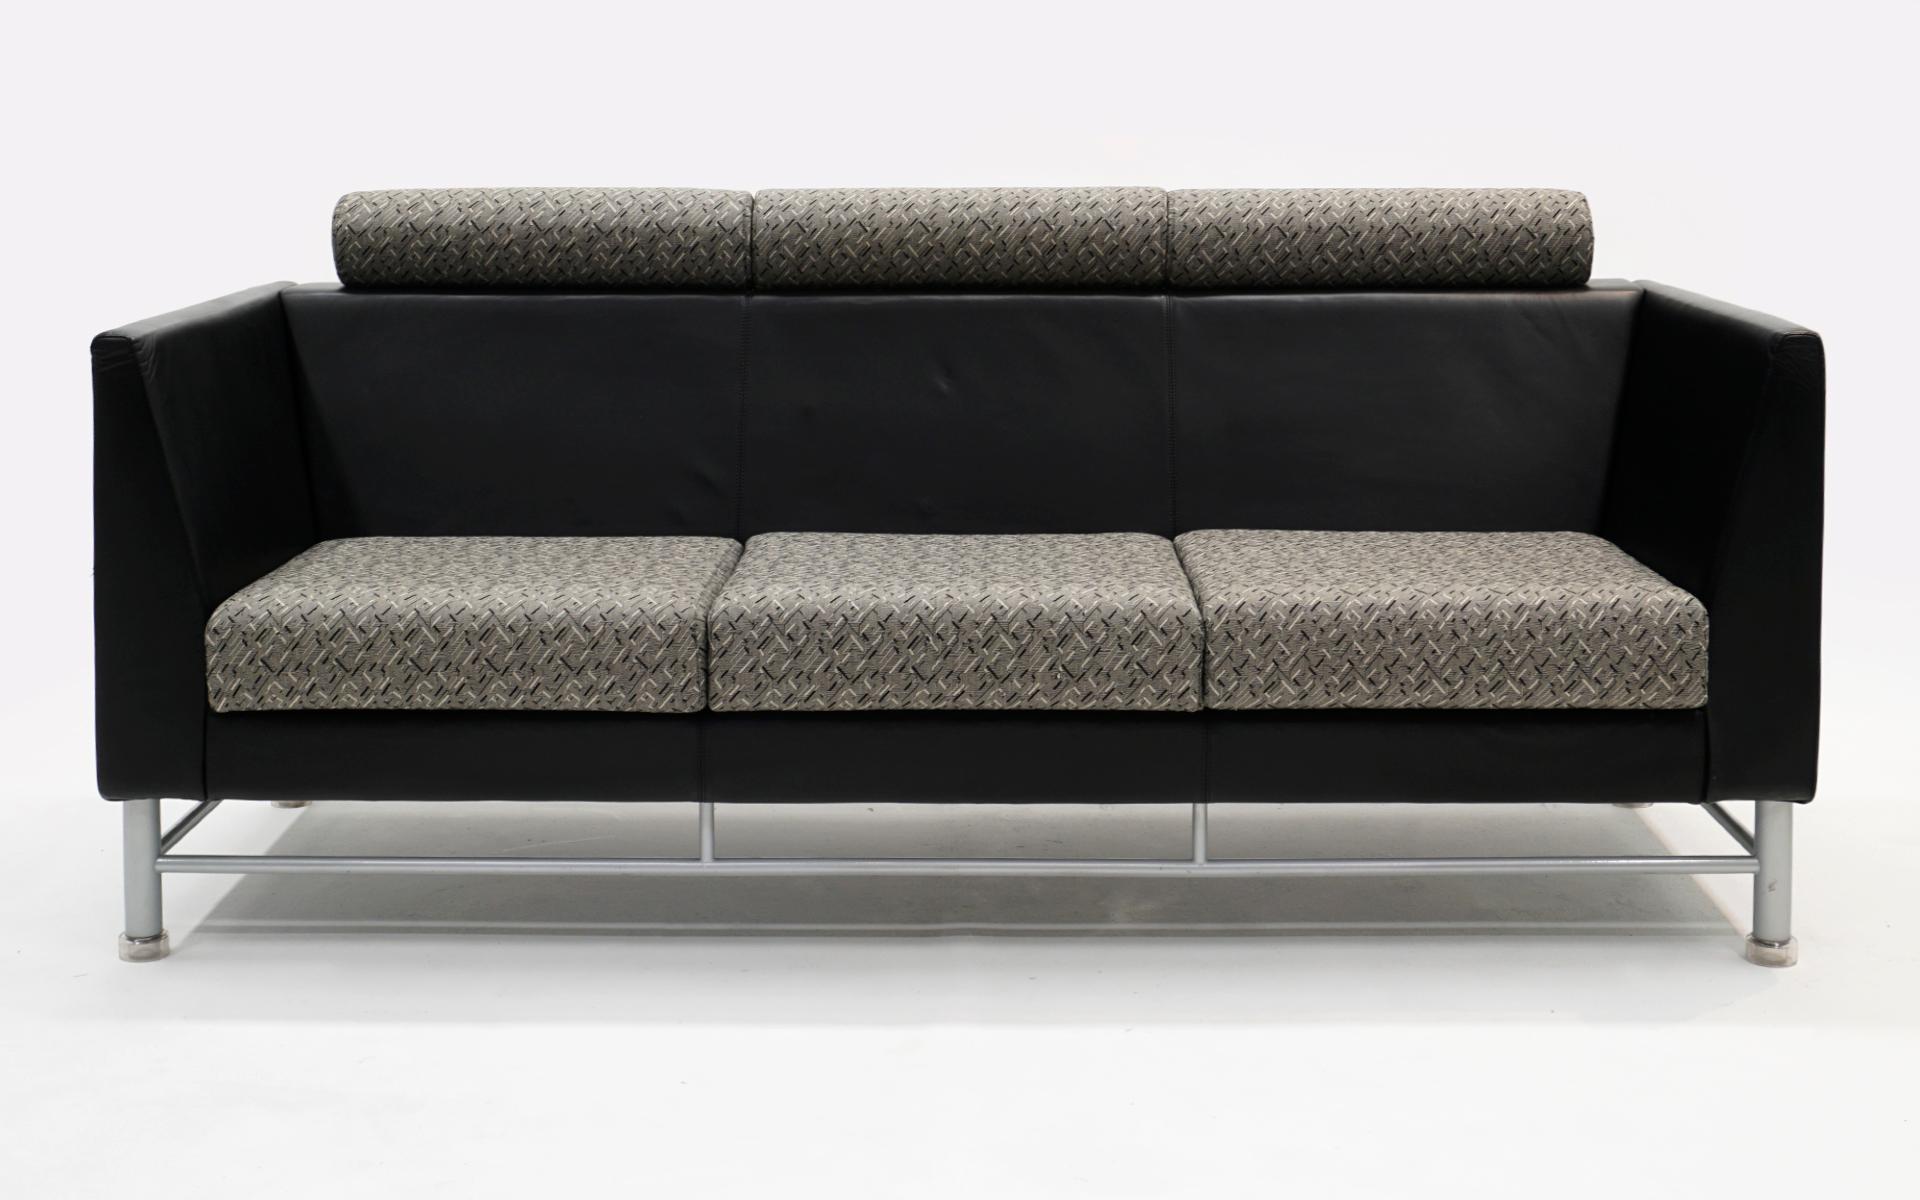 Eastside Sofa by Ettore Sottsass and manufactured by Knoll, 1980s. Original black leather and gray and black patterned fabric. Aluminum and steel base construction. There are no tears significant scratches or repairs to the leather. There are a two